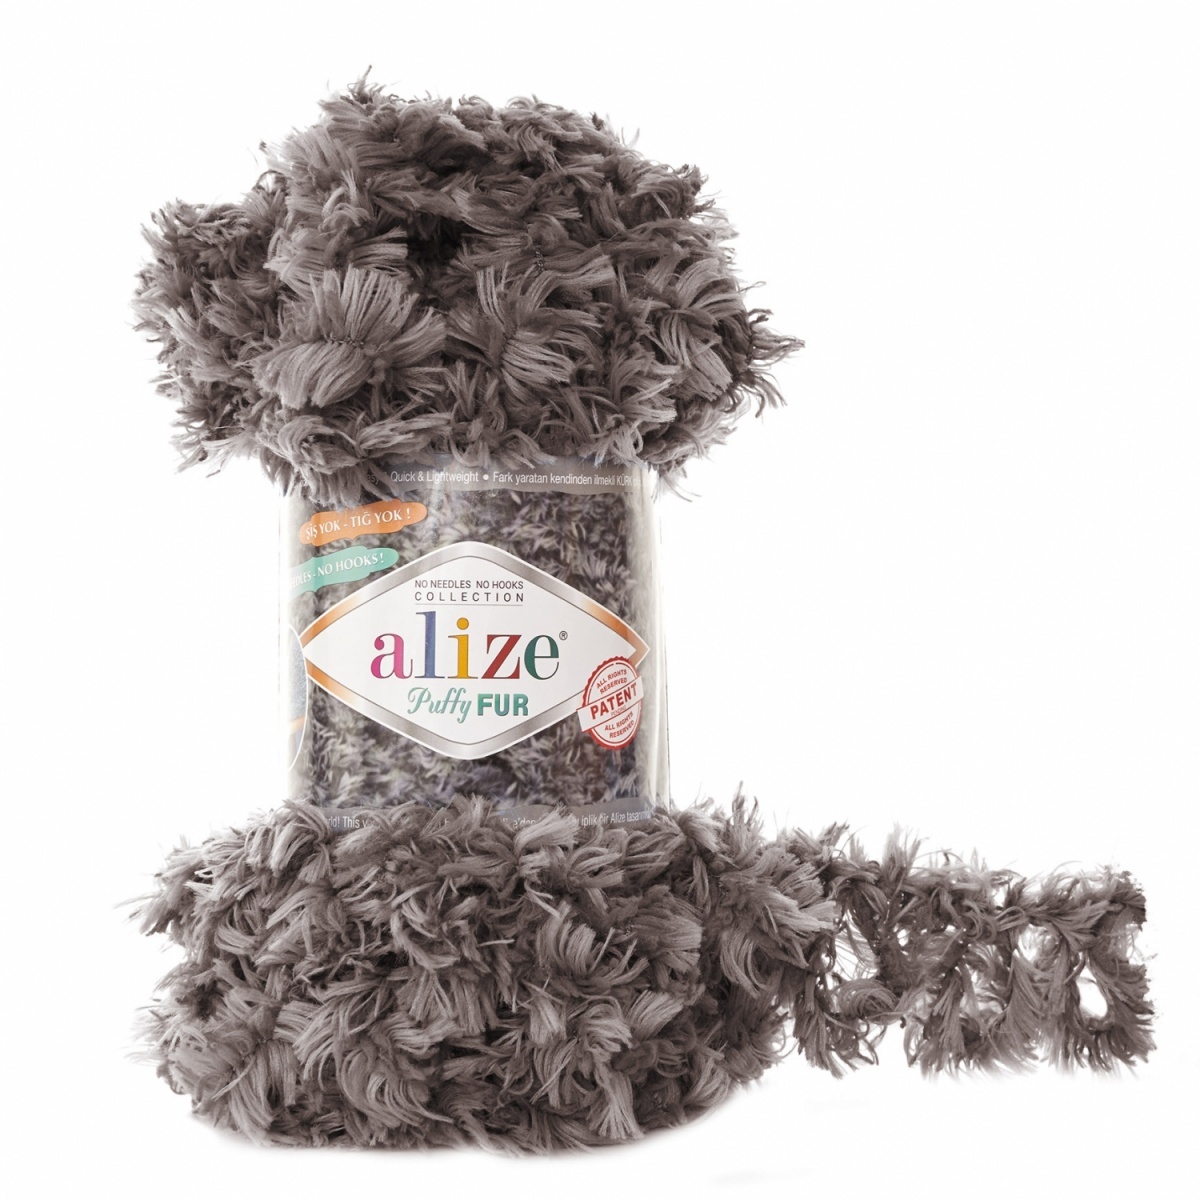 Alize Puffy Fur, 100% Polyester 5 Skein Value Pack, 500g фото 6